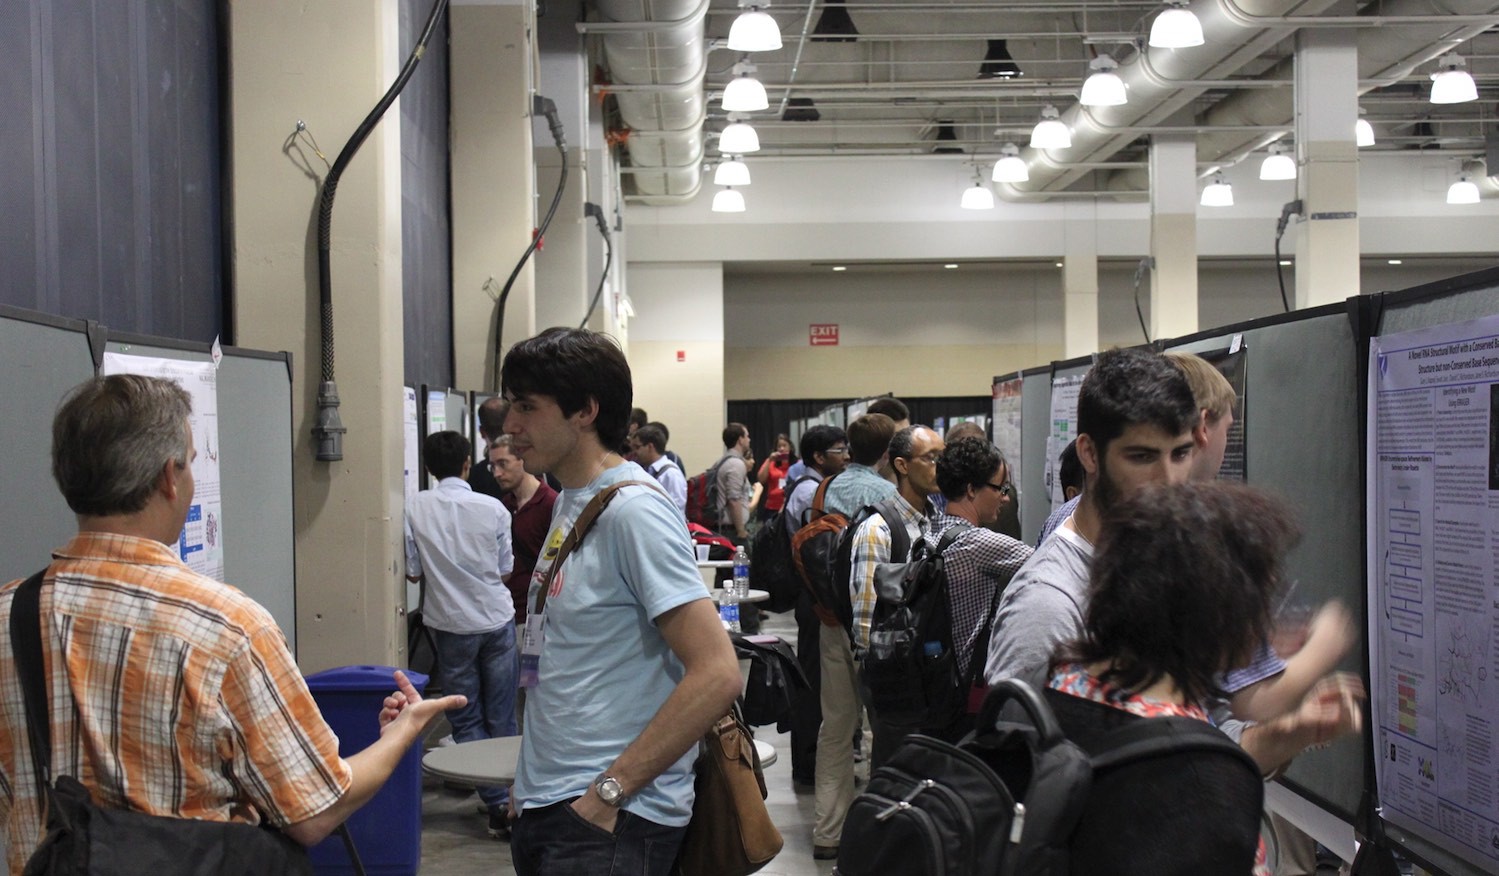 Researchers discussing at a poster session